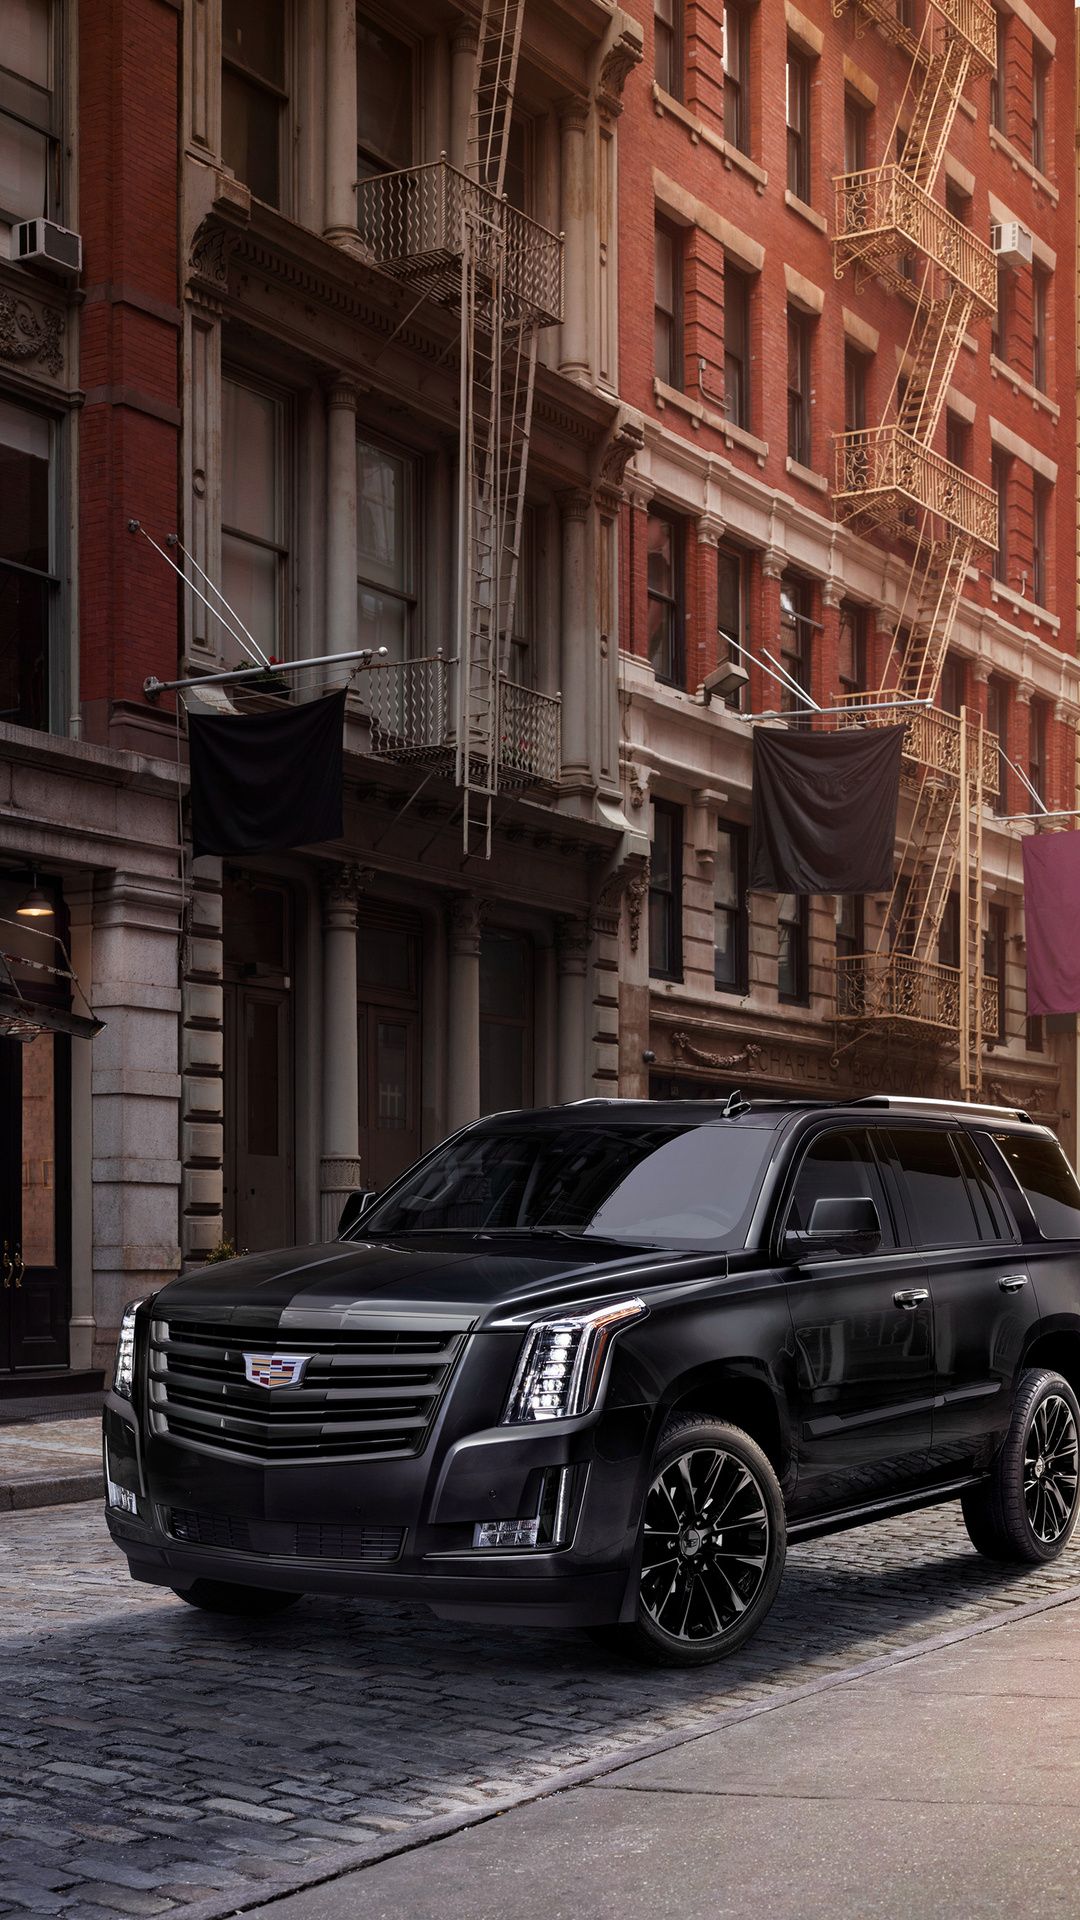 Cadillac Escalade Sport Edition iPhone 6s, 6 Plus, Pixel xl , One Plus 3t, 5 HD 4k Wallpaper, Image, Background, Photo and Picture